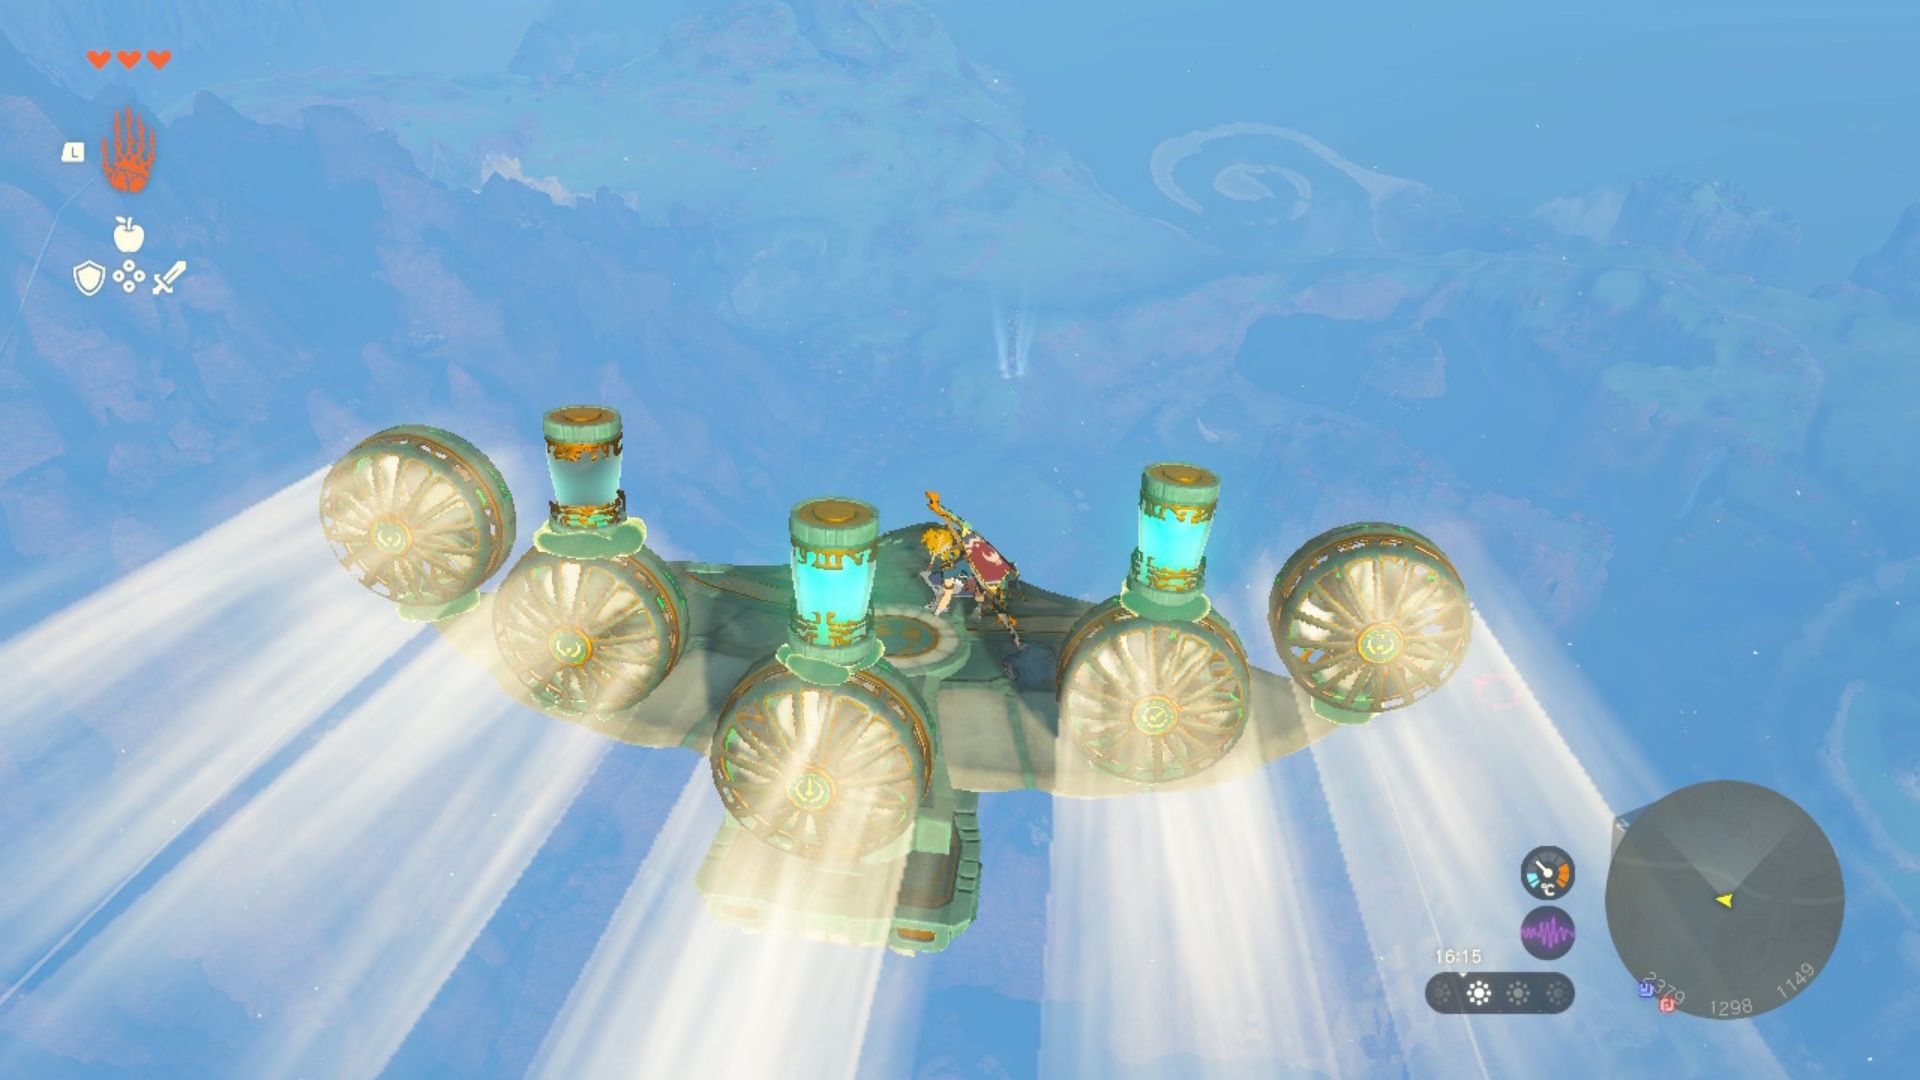 Zelda Tears of the Kingdom review - Link, a blonde man with armour and weapons on his back stood on a green and grey glider with fans attached at the tip of each of its wings. He's flying through the clouds with big floating islands high in the sky in front of him.